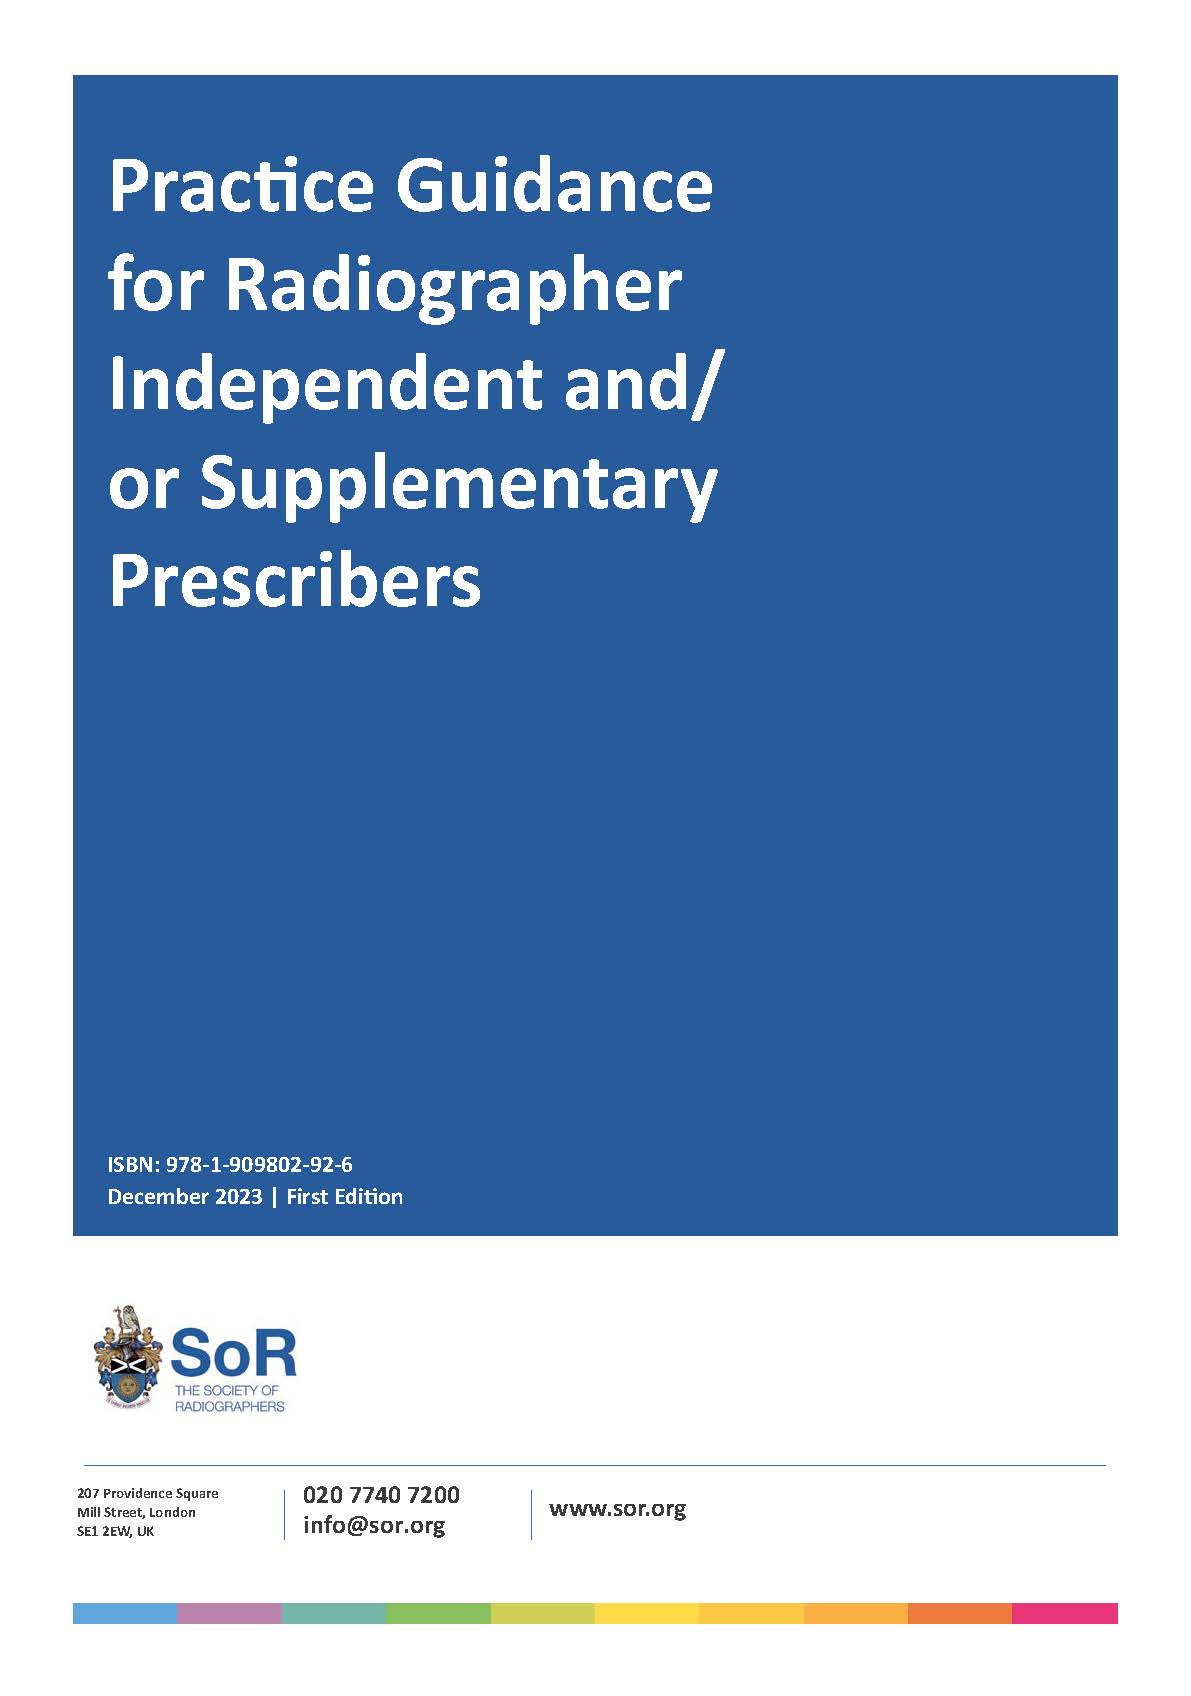 Practice Guidance for Radiographer Independent and/or Supplementary Prescribers (Second Edition)